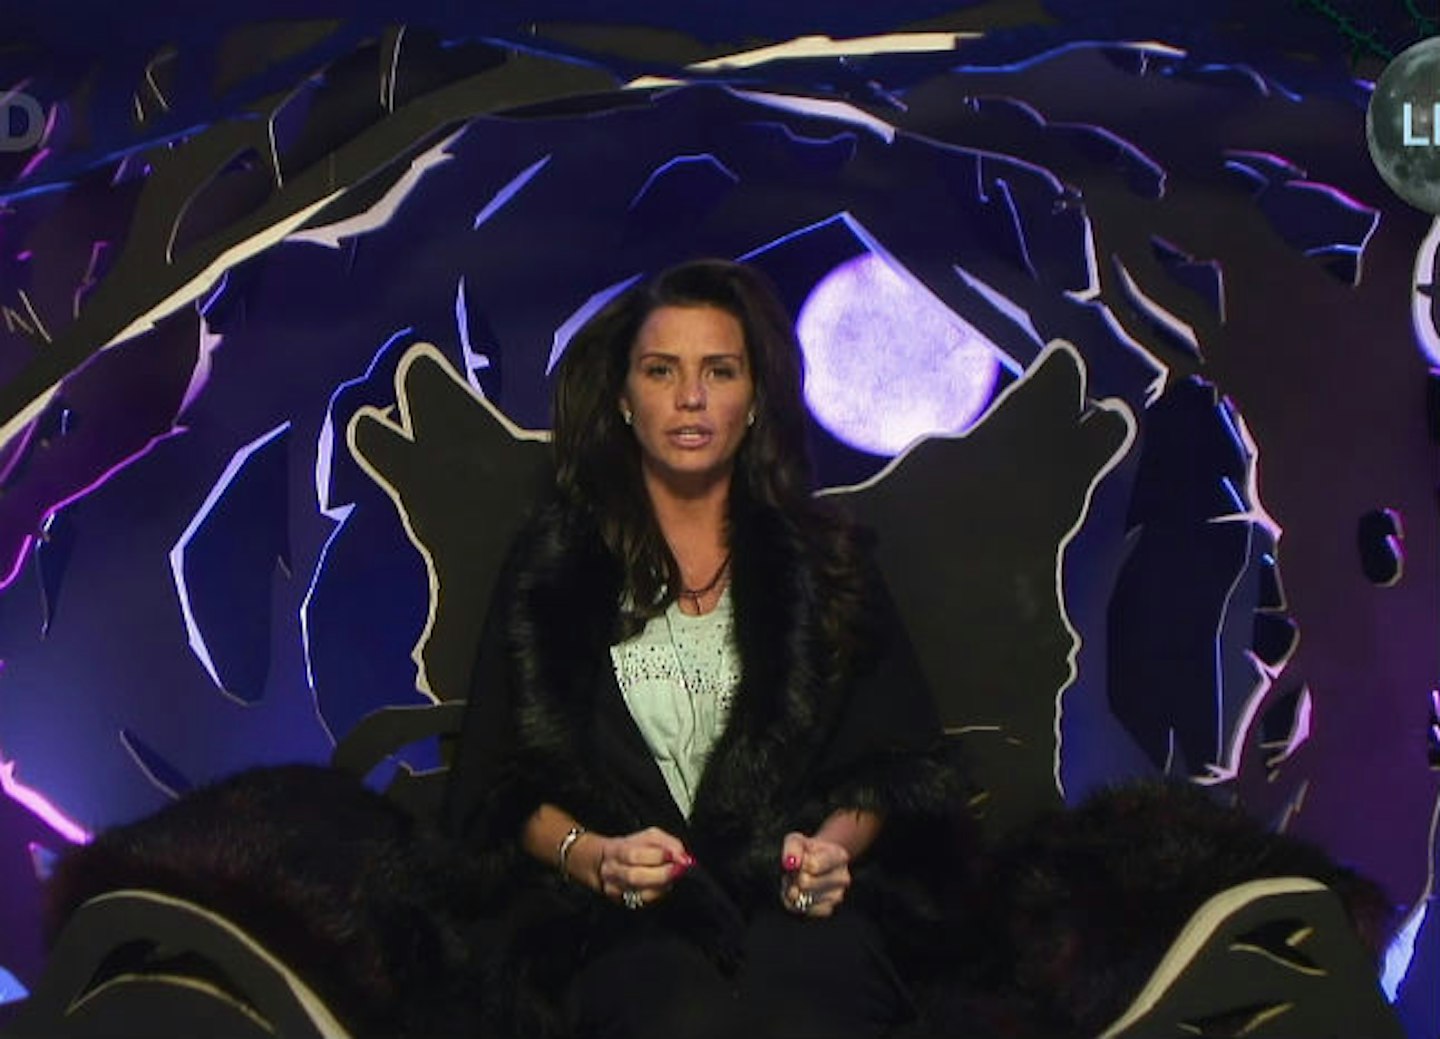 Katie has spoken at length about her exes in the CBB house